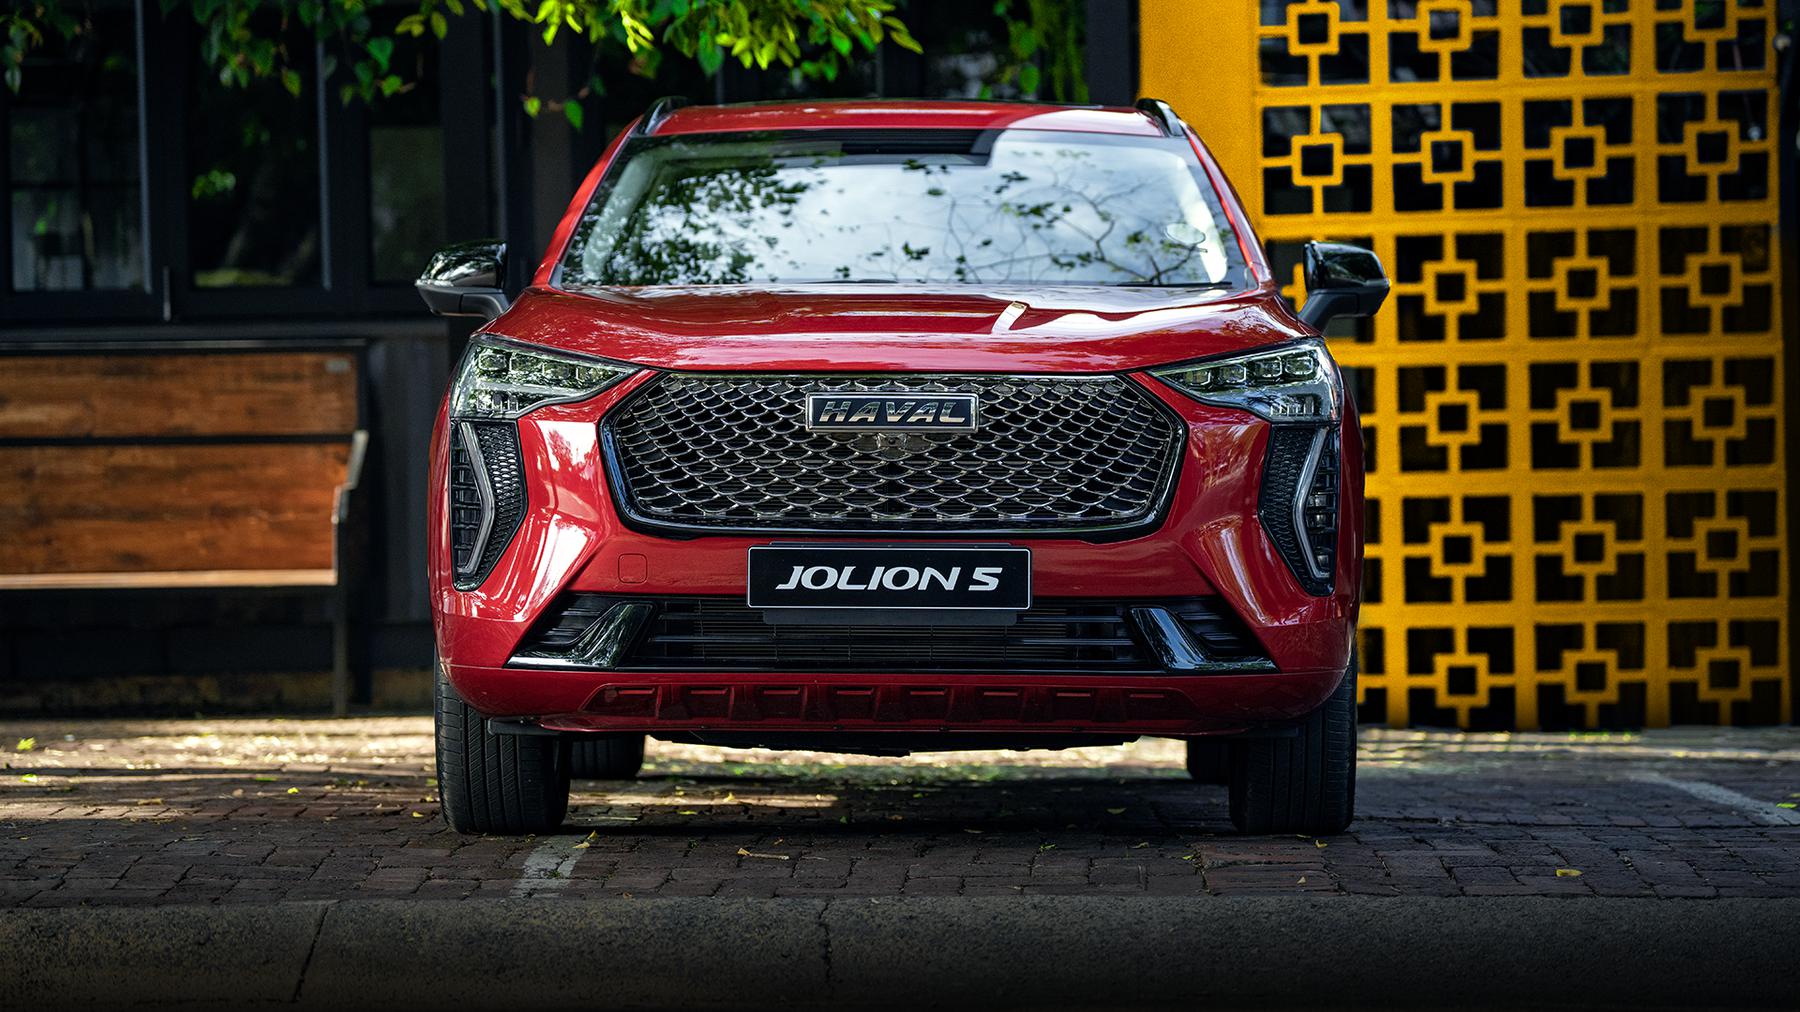 what is covered under haval jolion s manufacturer car warranty?